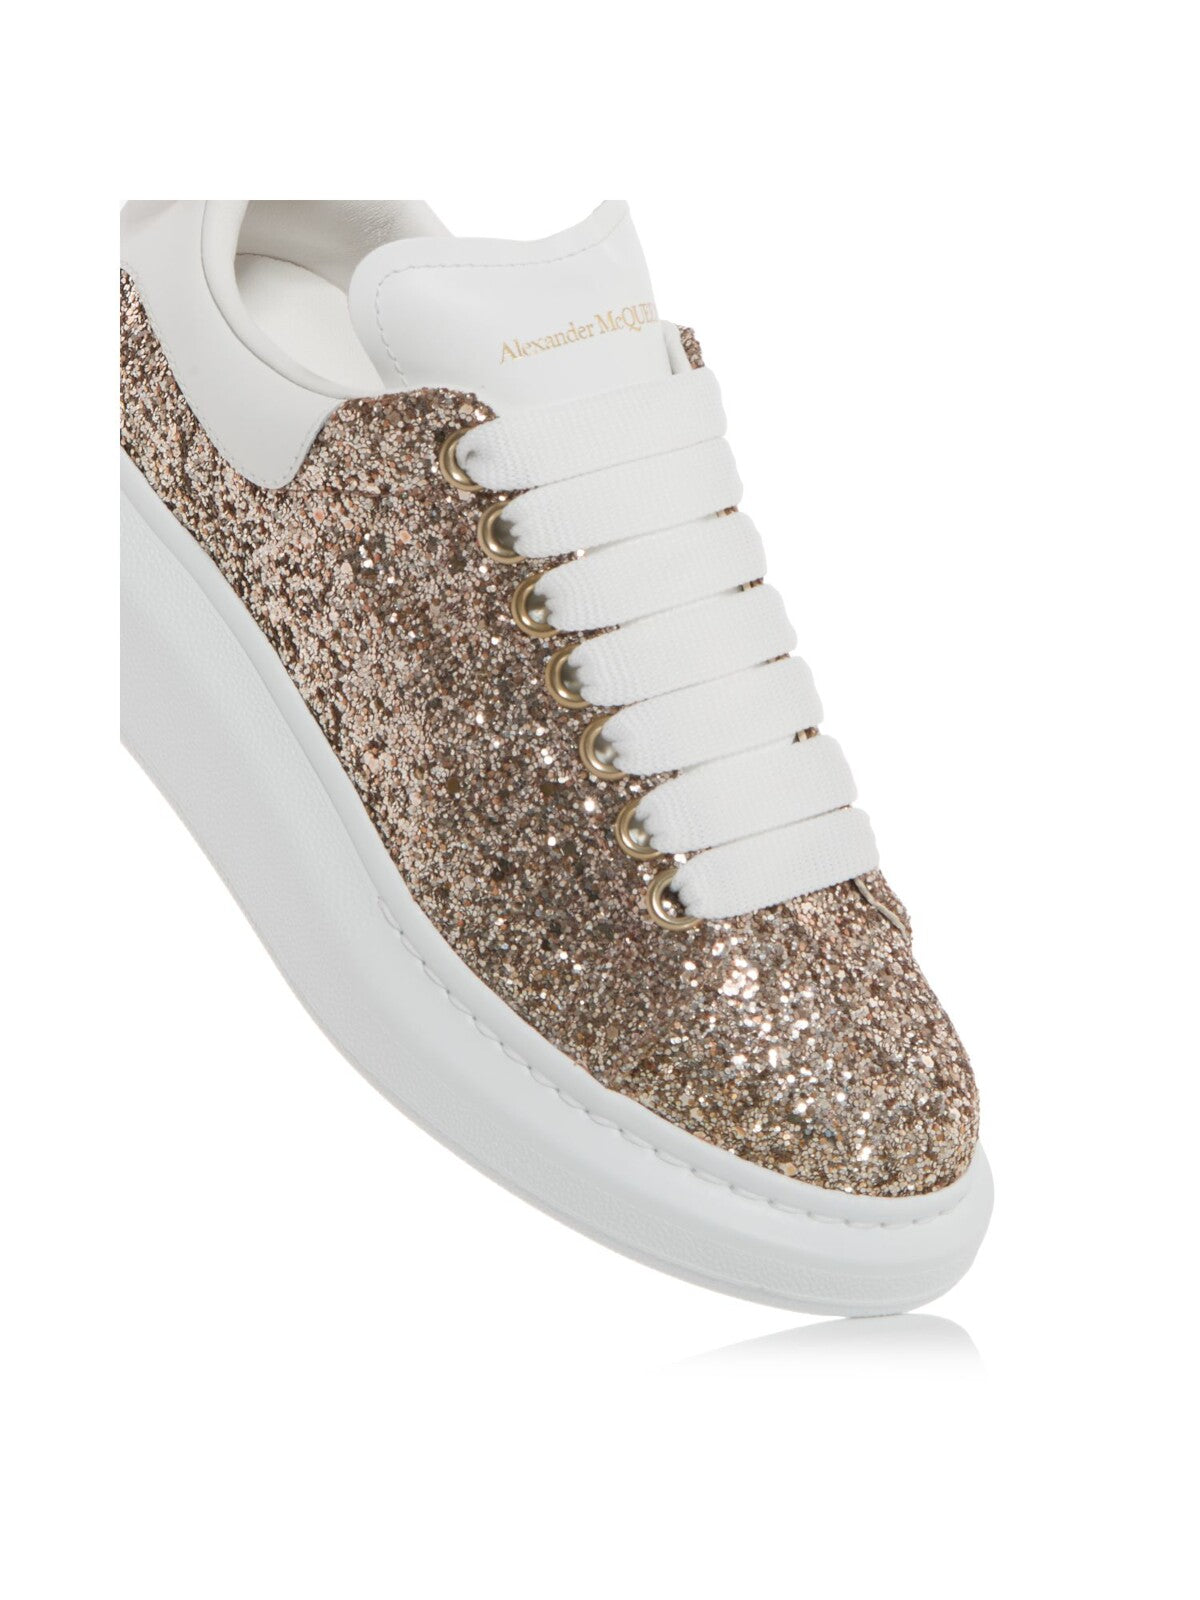 ALEXANDER MCQUEEN Womens Brown Glitter-Embellished 1-1/2" Platform Padded Round Toe Wedge Lace-Up Sneakers Shoes 37.5